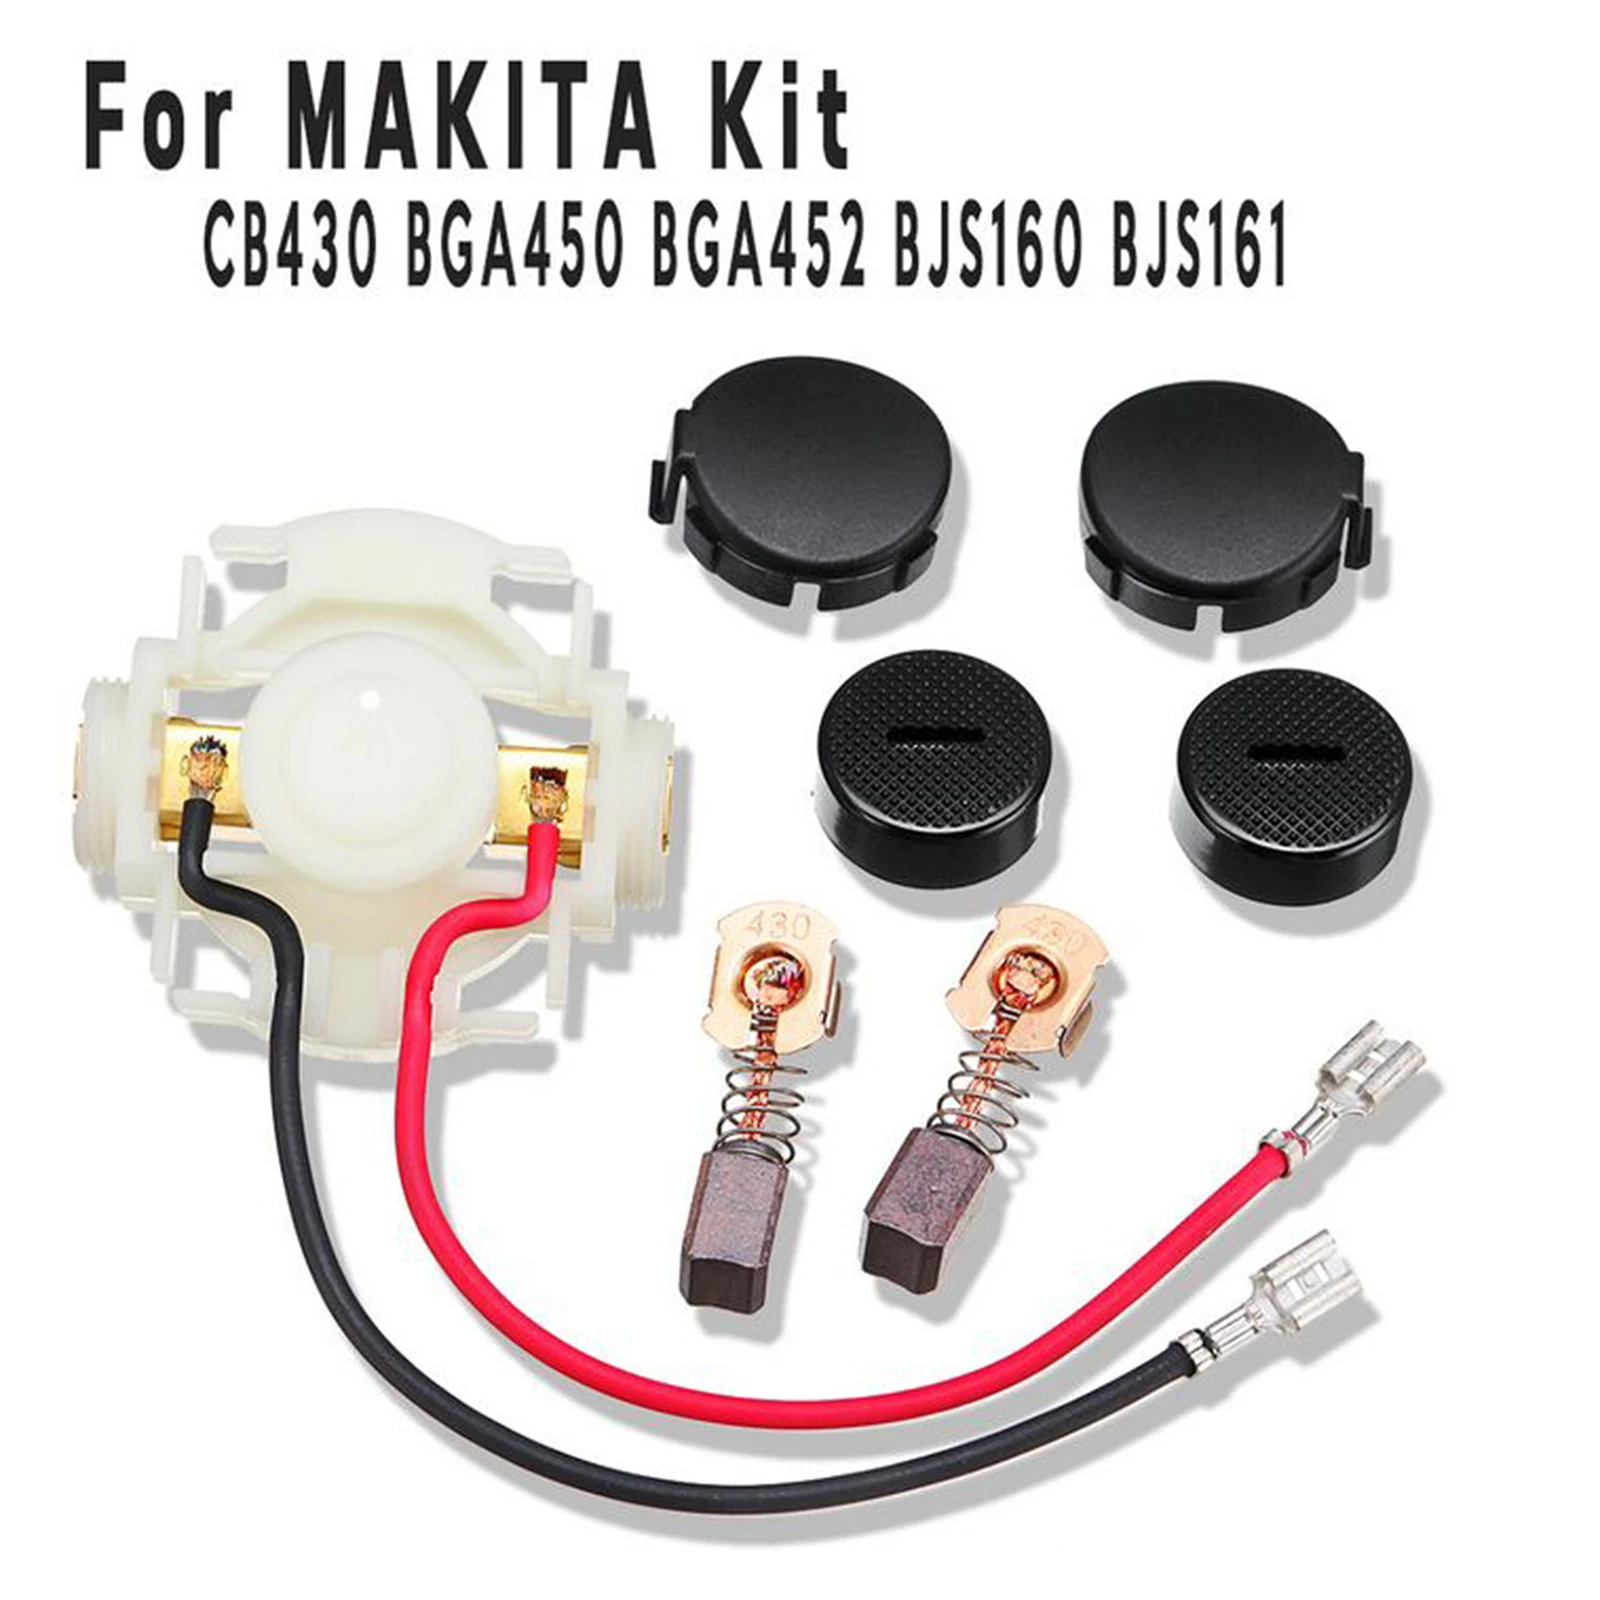 Carbon Brush Holder Kit fits for M-a-kita 638921-2 BGA450 BGA452 ,Easy to Install, High quality Spare Parts